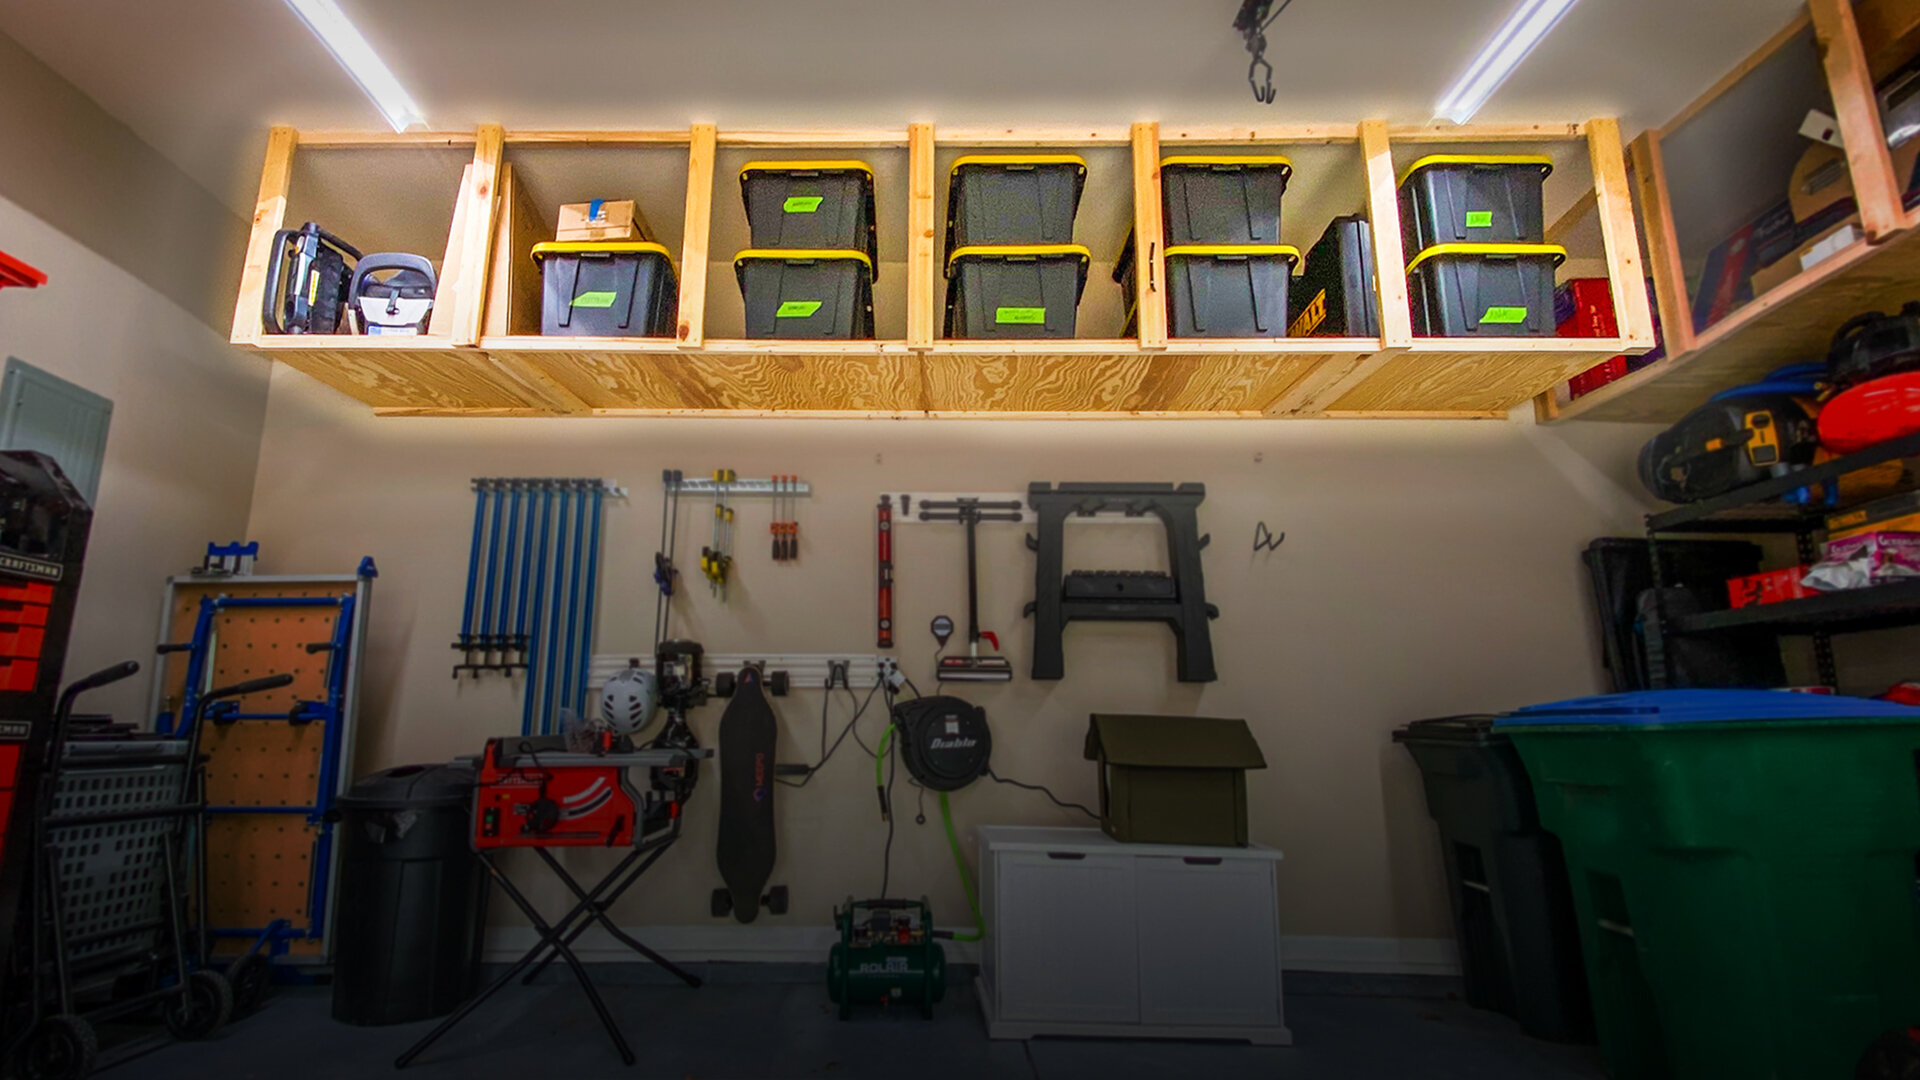 How To Build Diy Garage Storage Shelves, How To Build Wood Shelves In The Garage